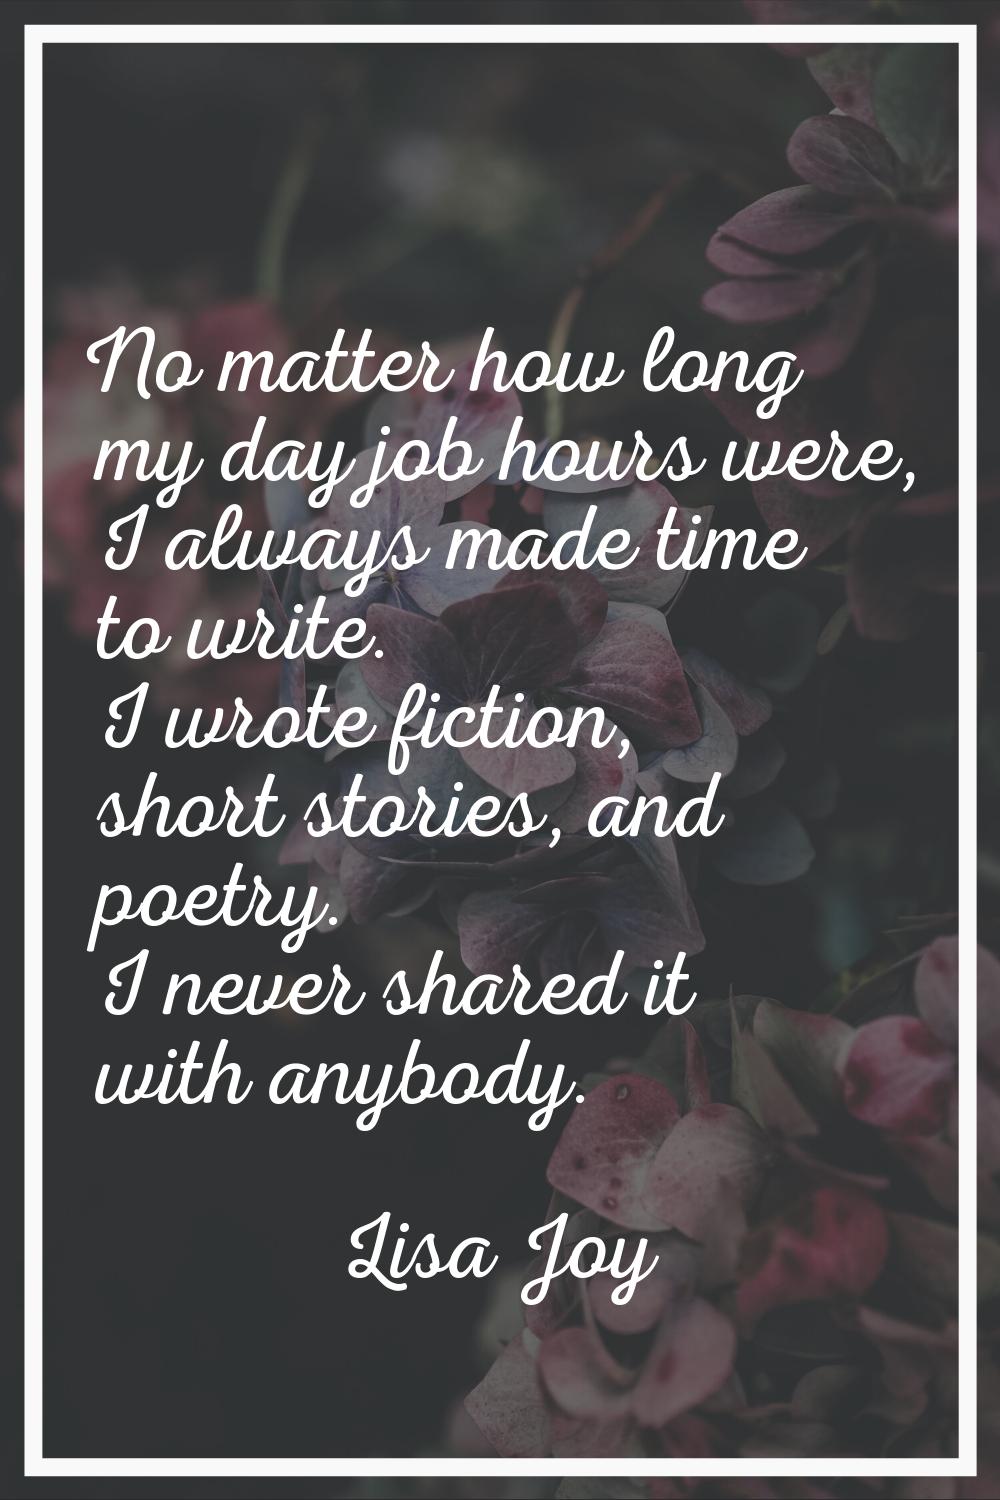 No matter how long my day job hours were, I always made time to write. I wrote fiction, short stori